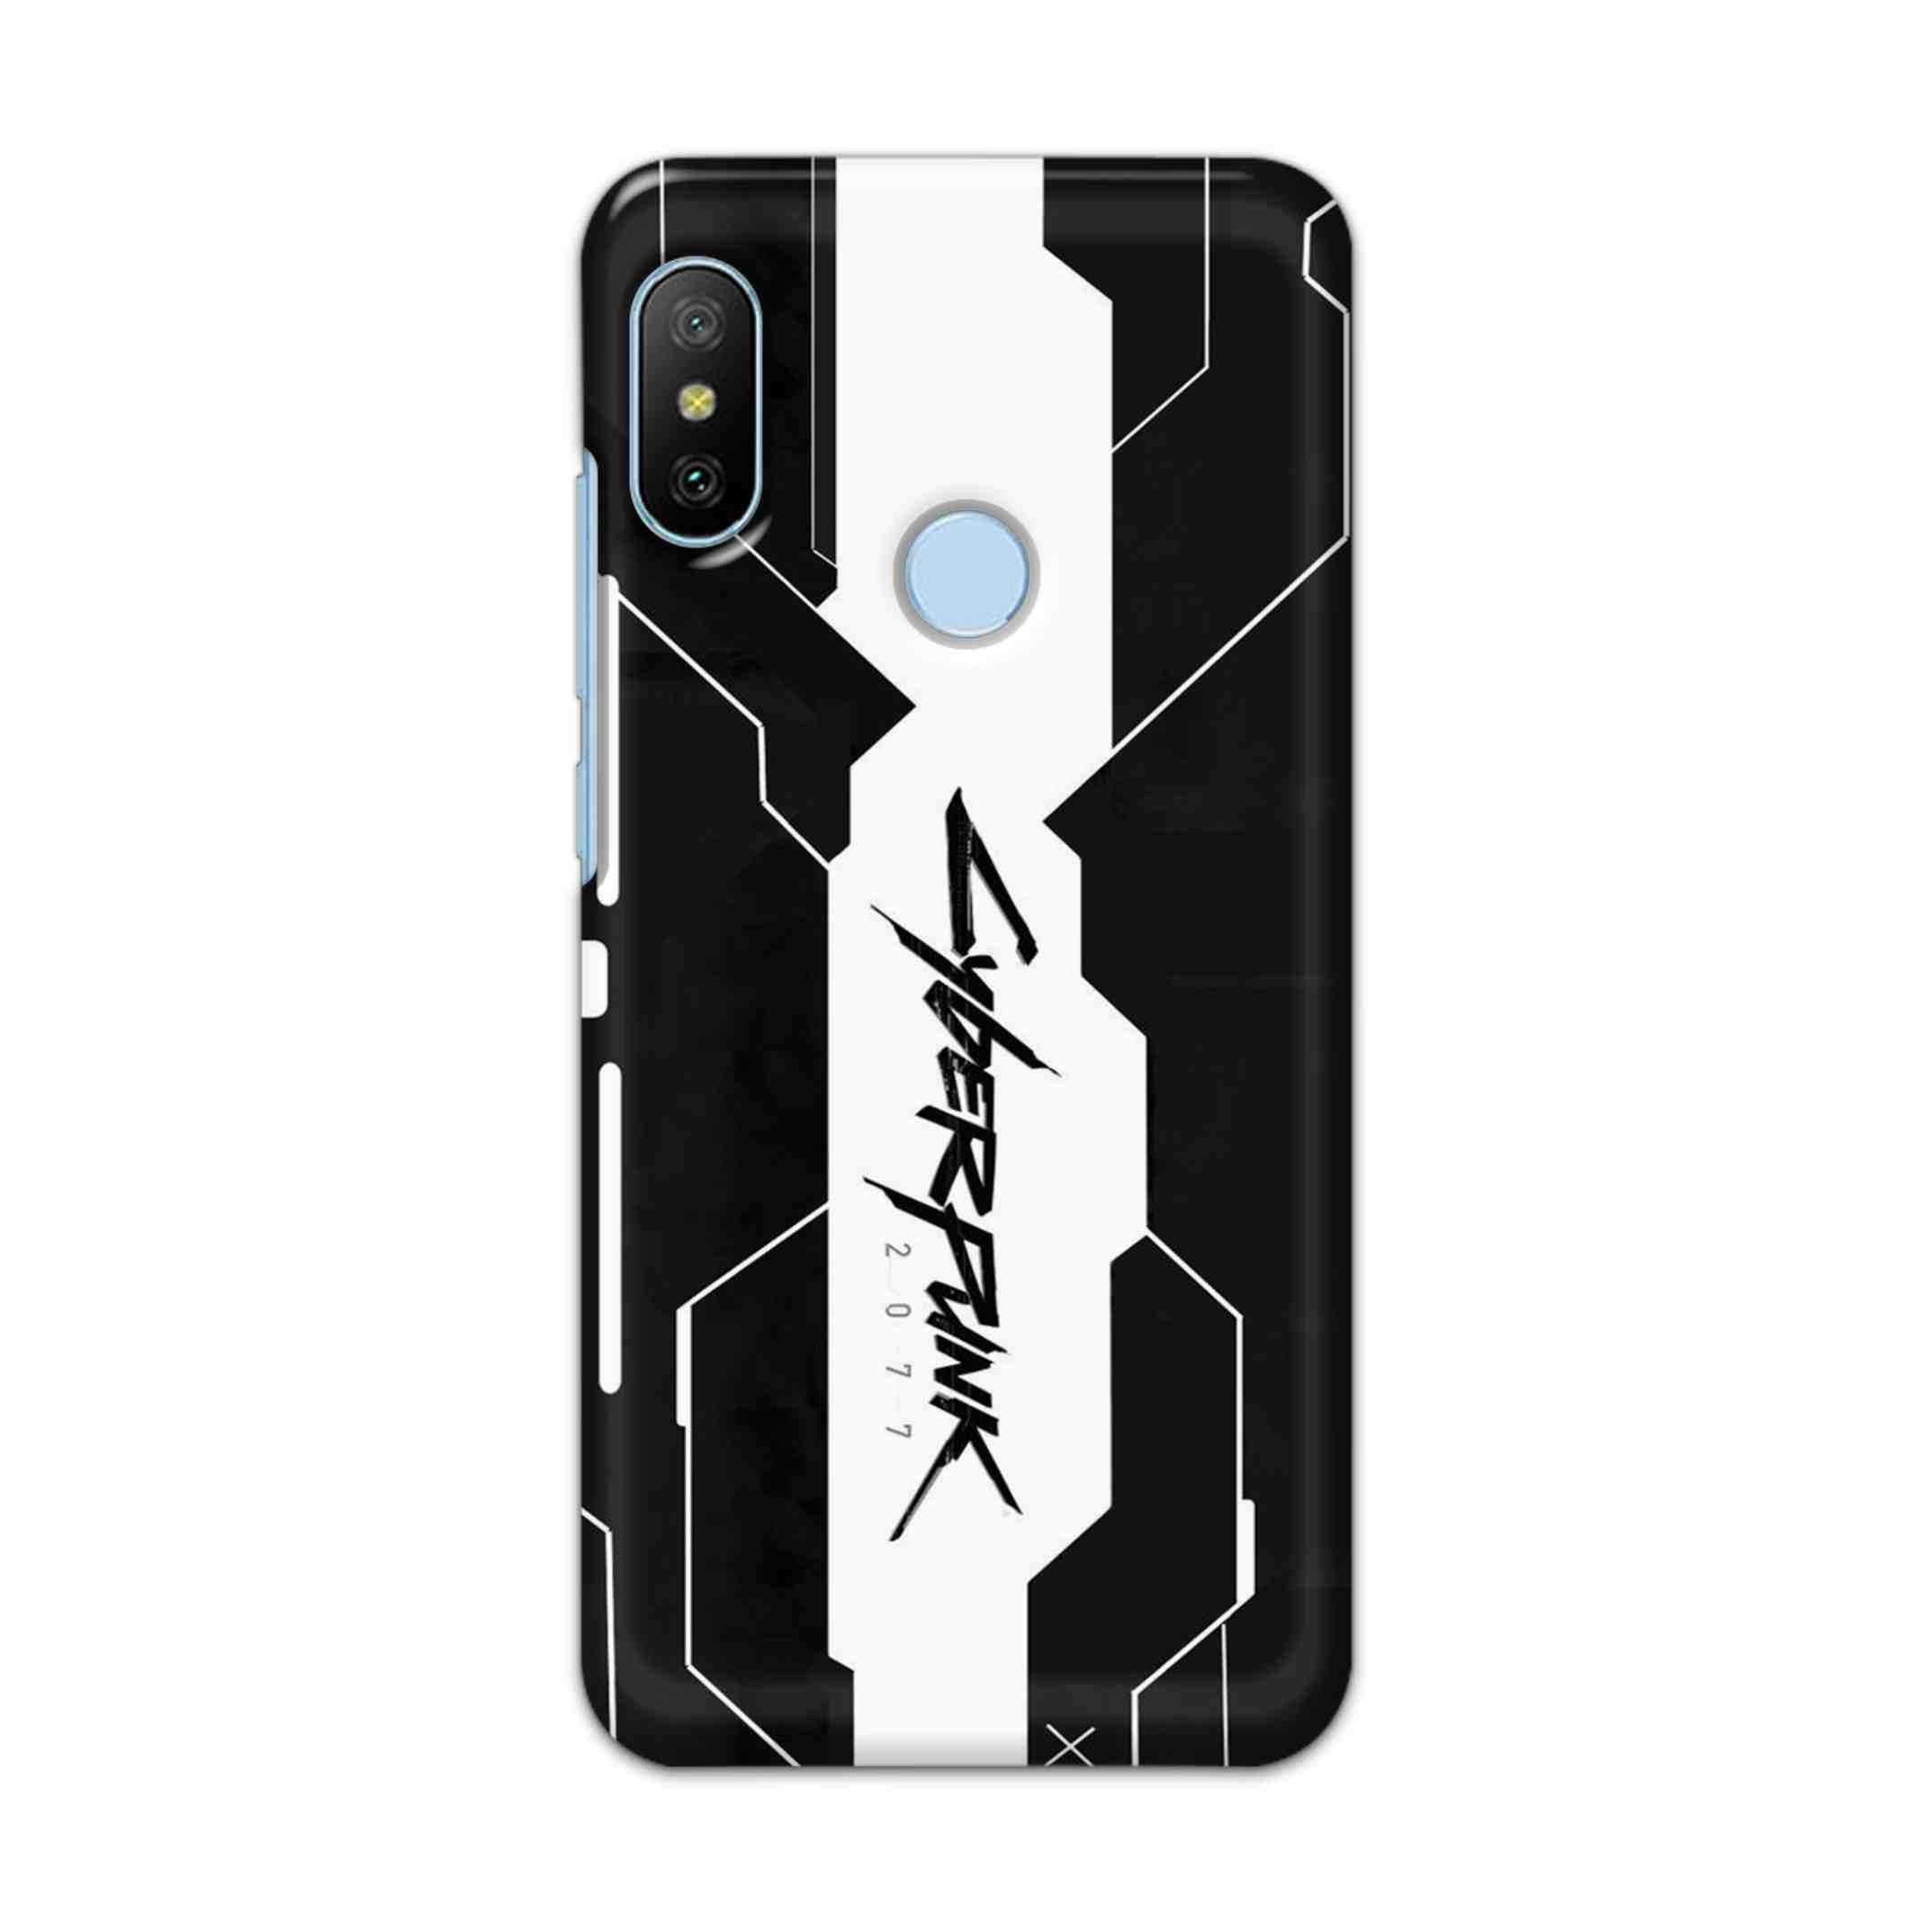 Buy Cyberpunk 2077 Art Hard Back Mobile Phone Case/Cover For Xiaomi A2 / 6X Online